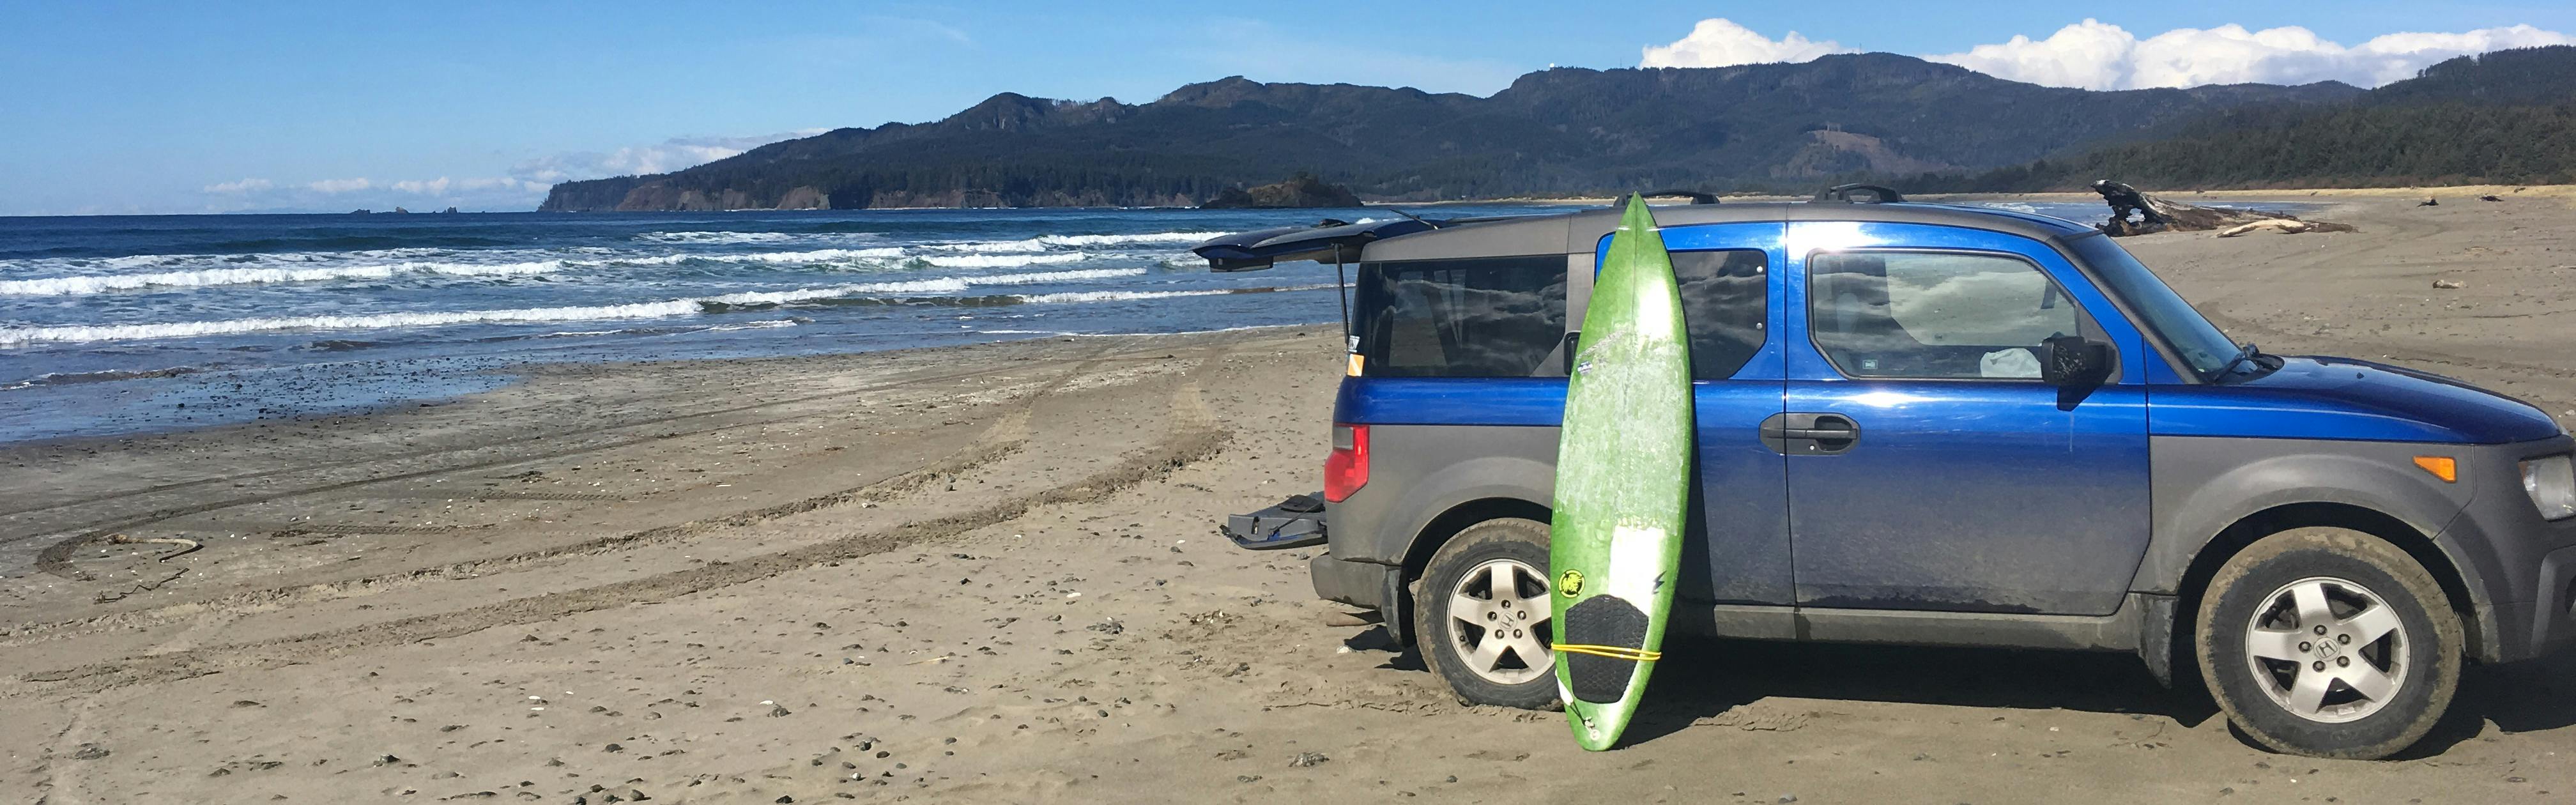 A blue SUV on the beach with a green surfboard